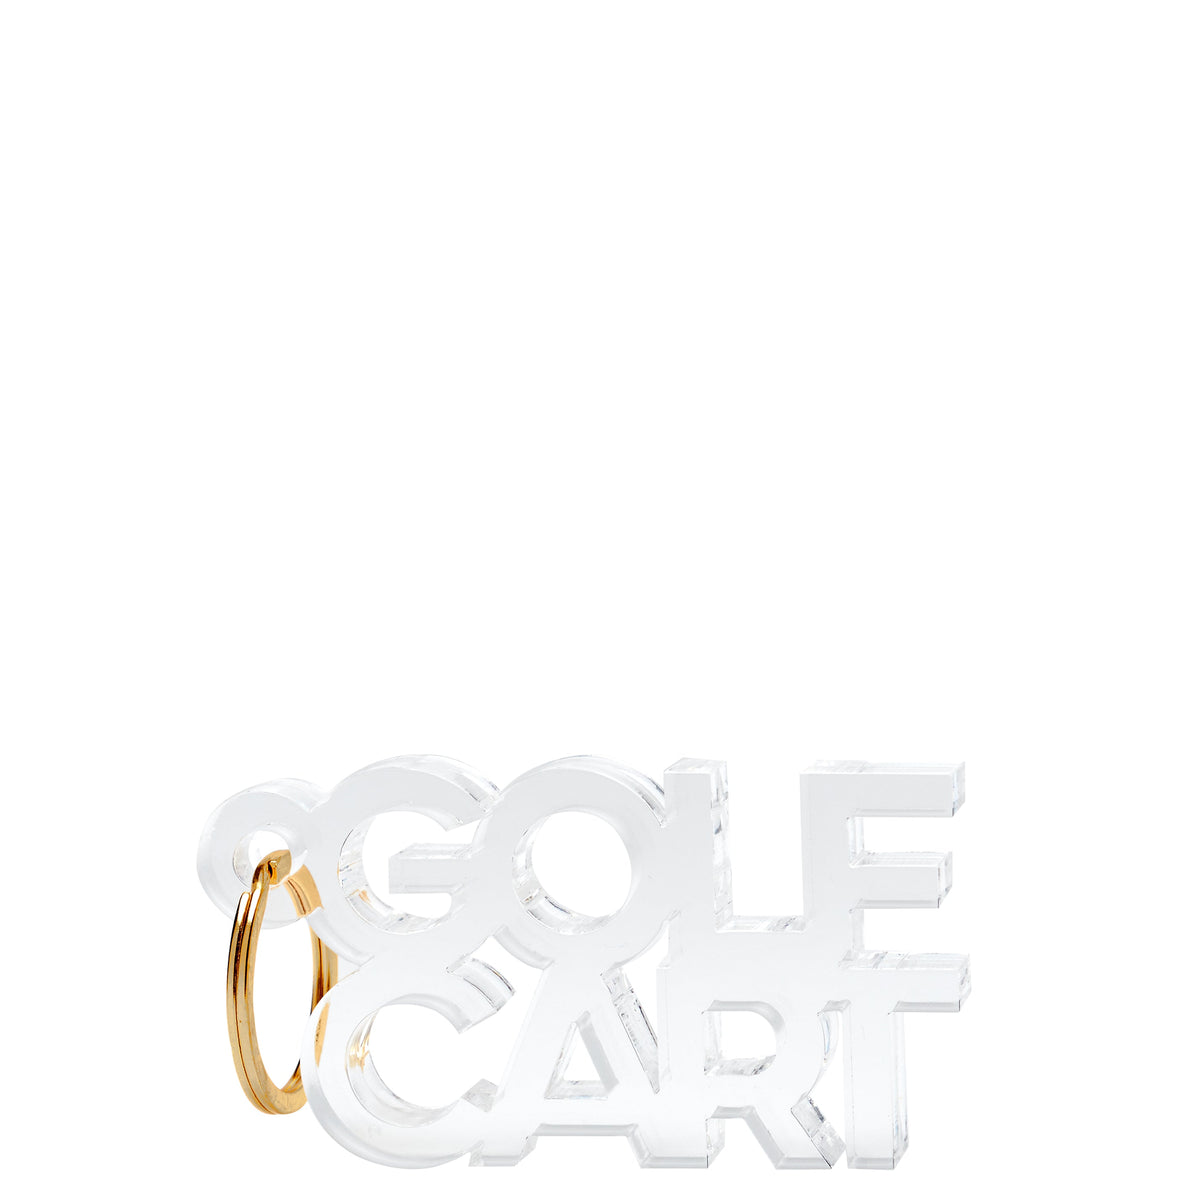 Keychain OLF CART  1.5 inches height